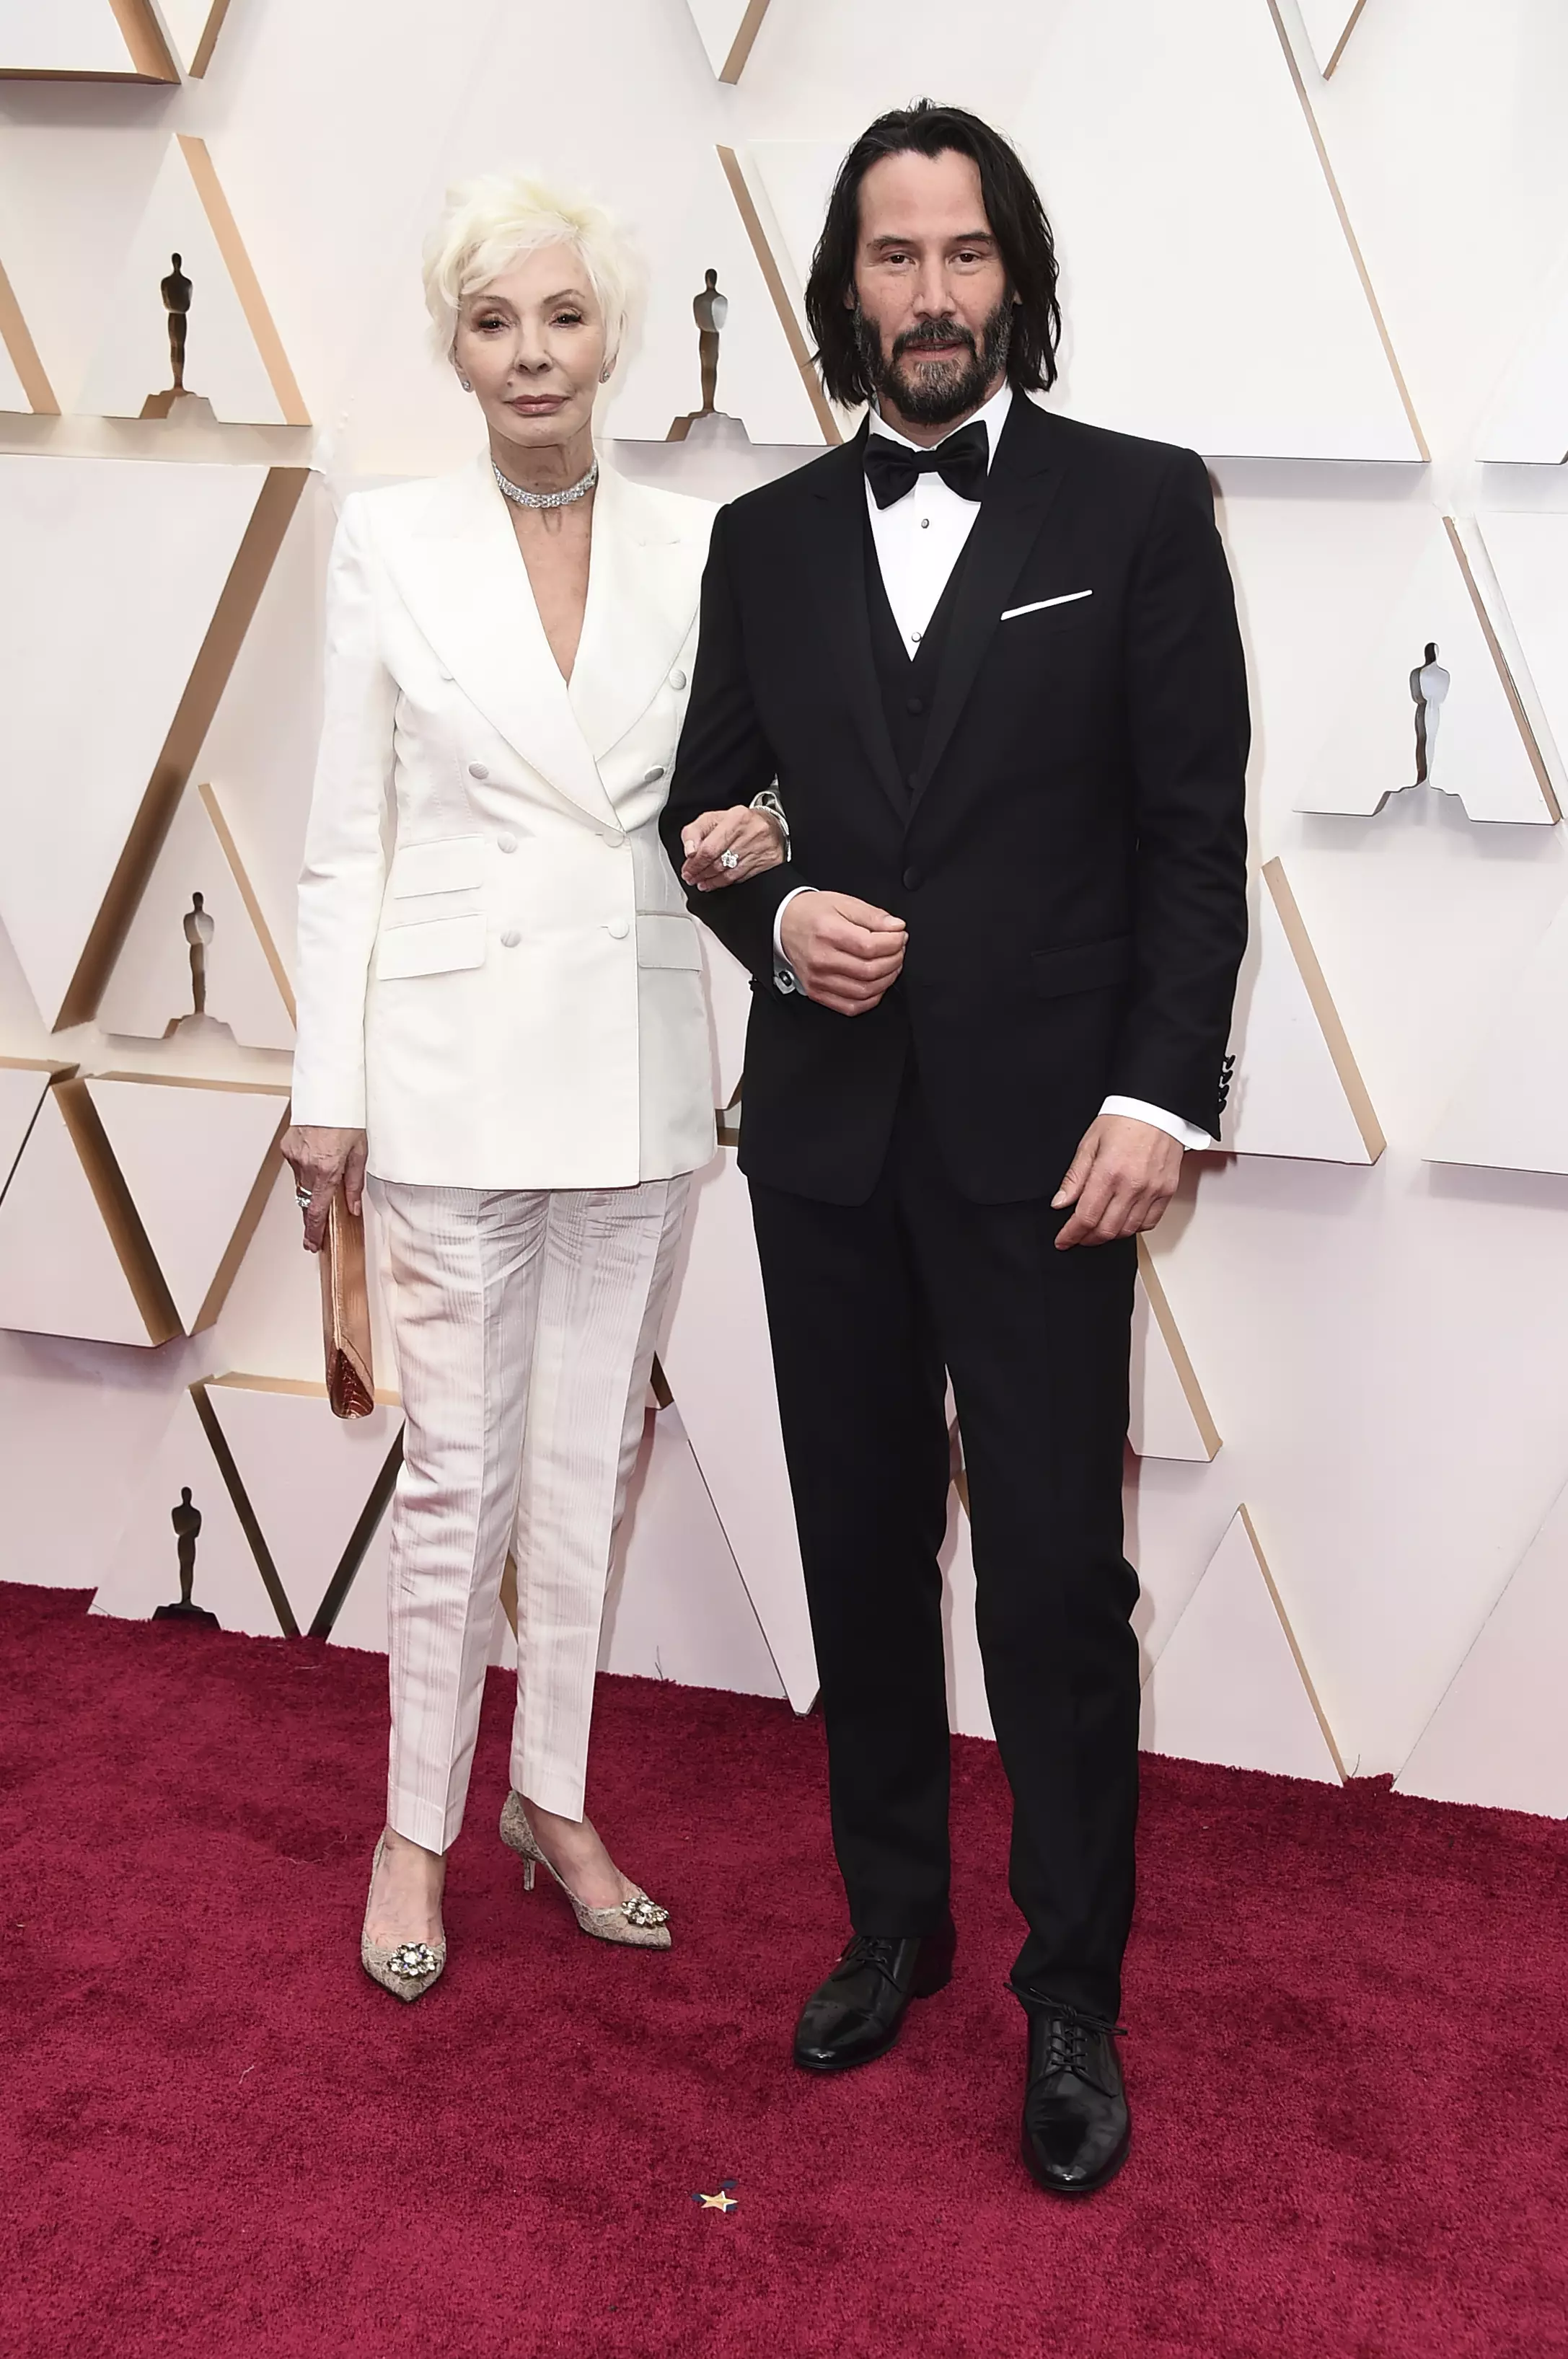 Patricia Taylor, left, and Keanu Reeves arrive at the Oscars.